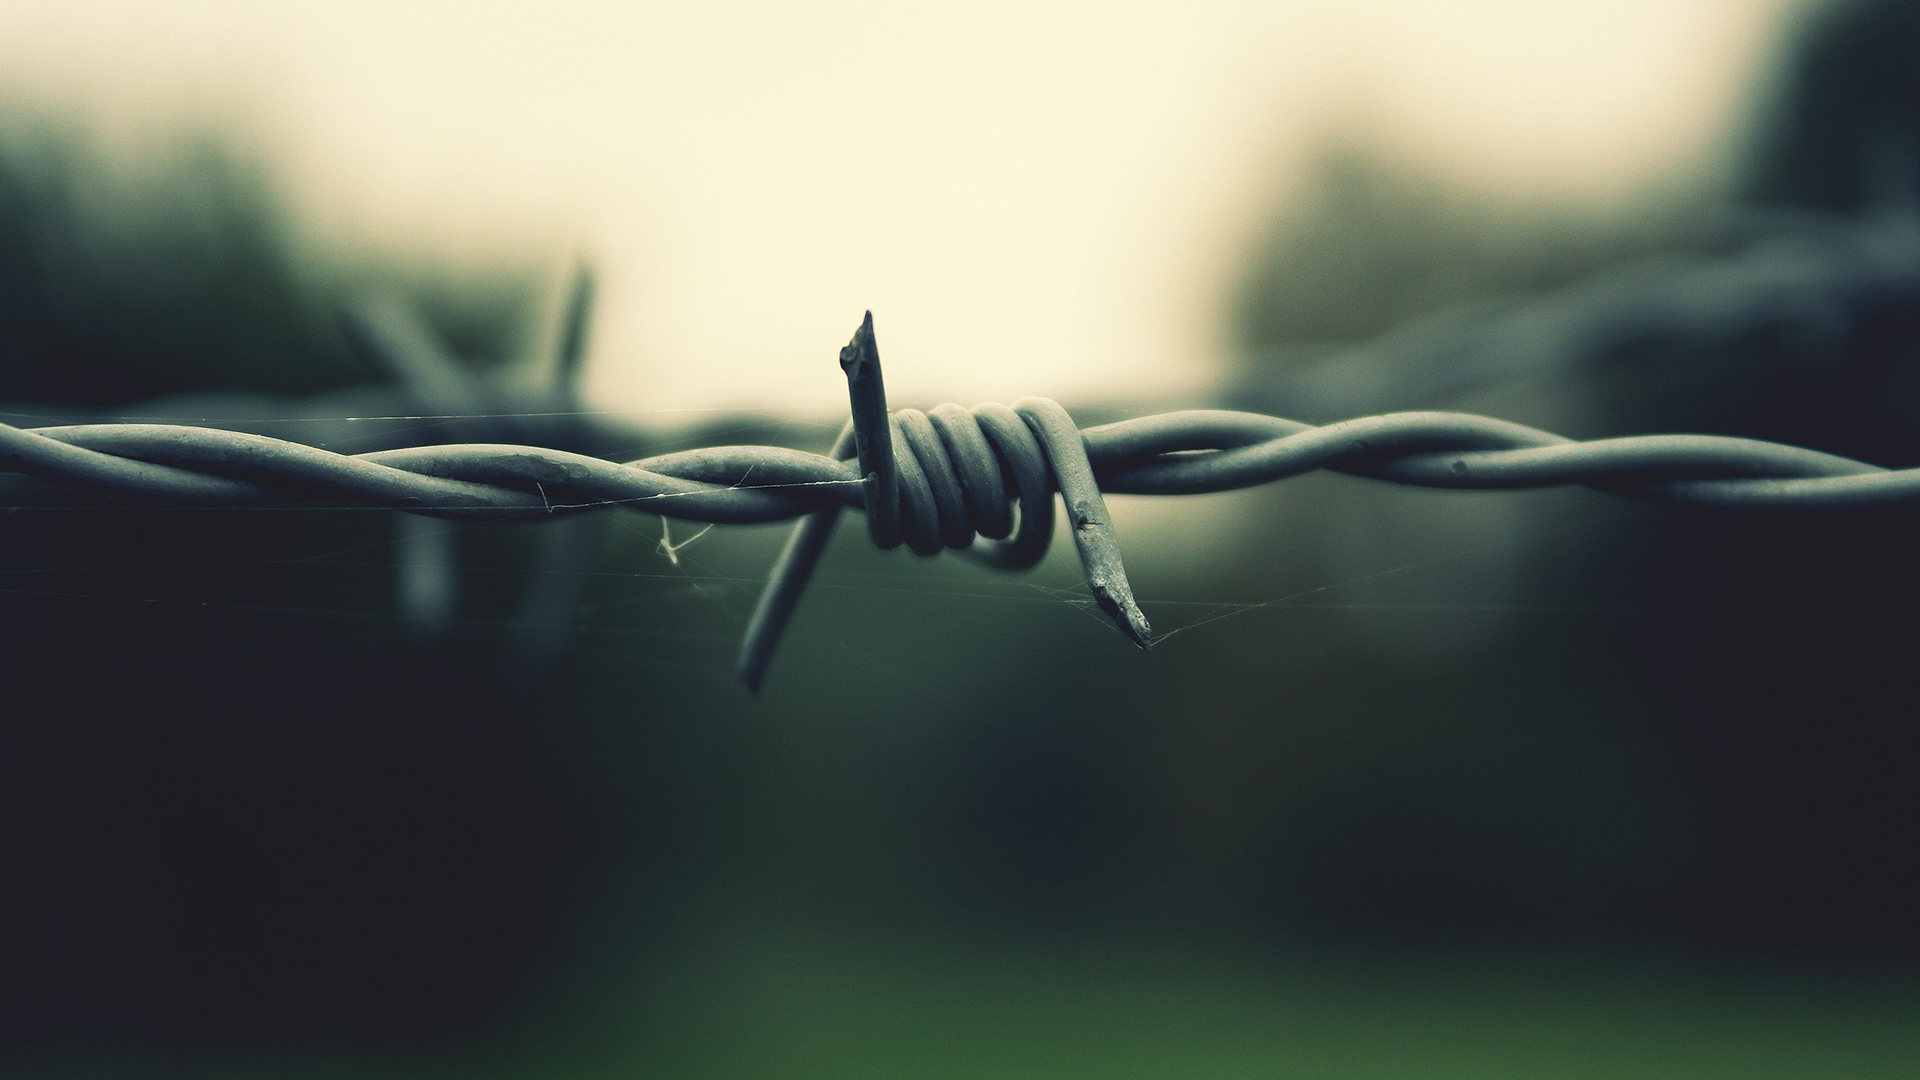 The Barbed Wire Wallpaper iPhone